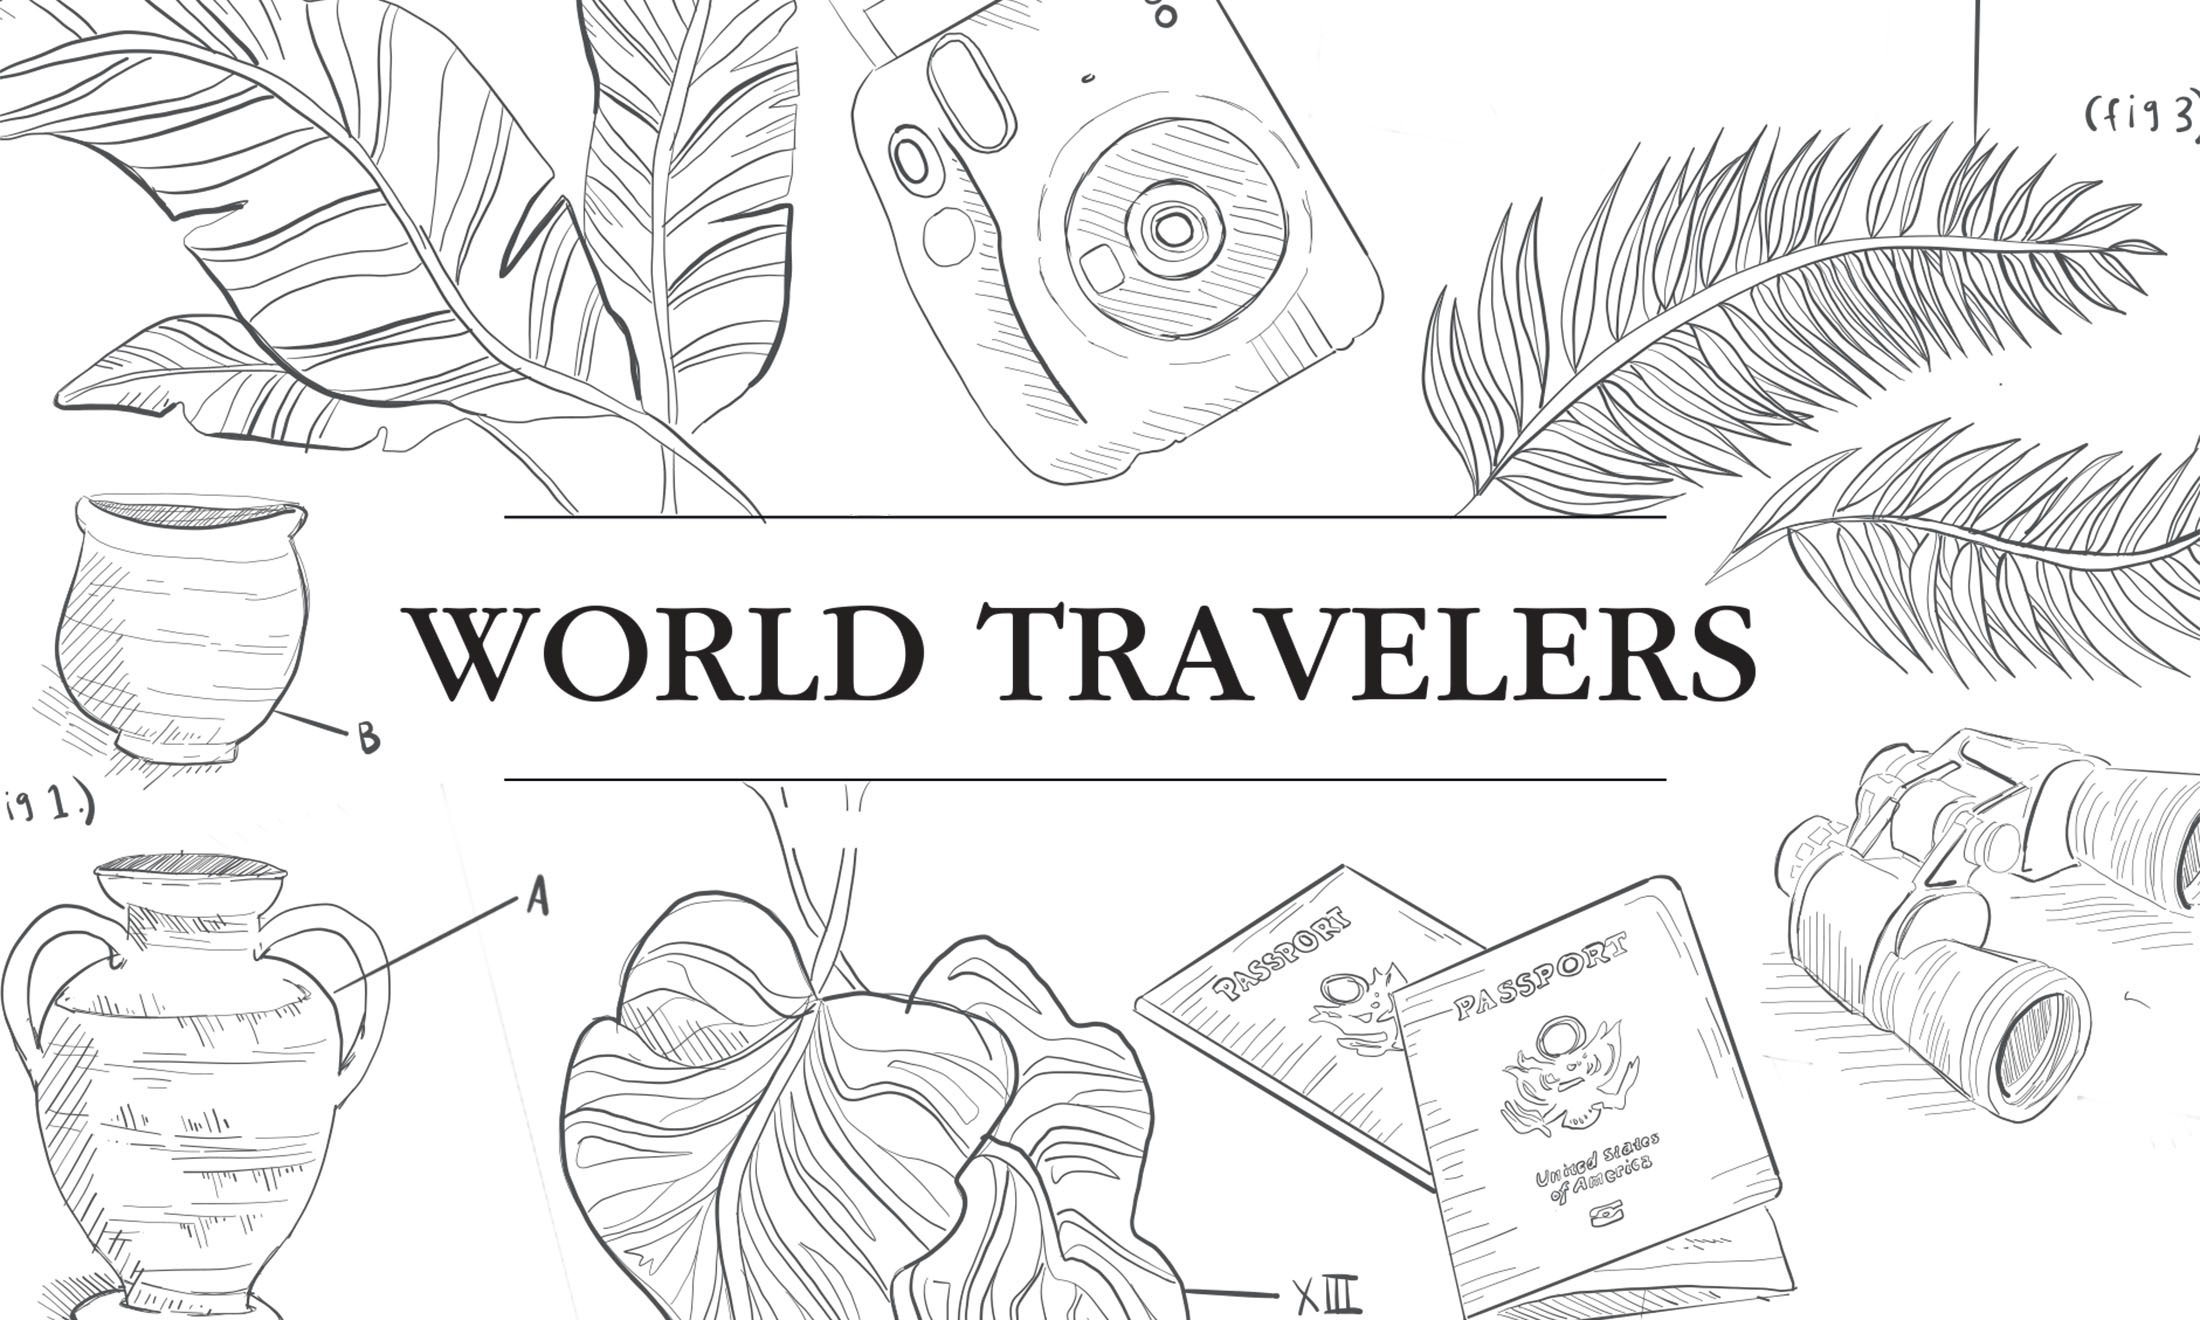 Illustration of leaves, camera and pottery with words "World Traveler"